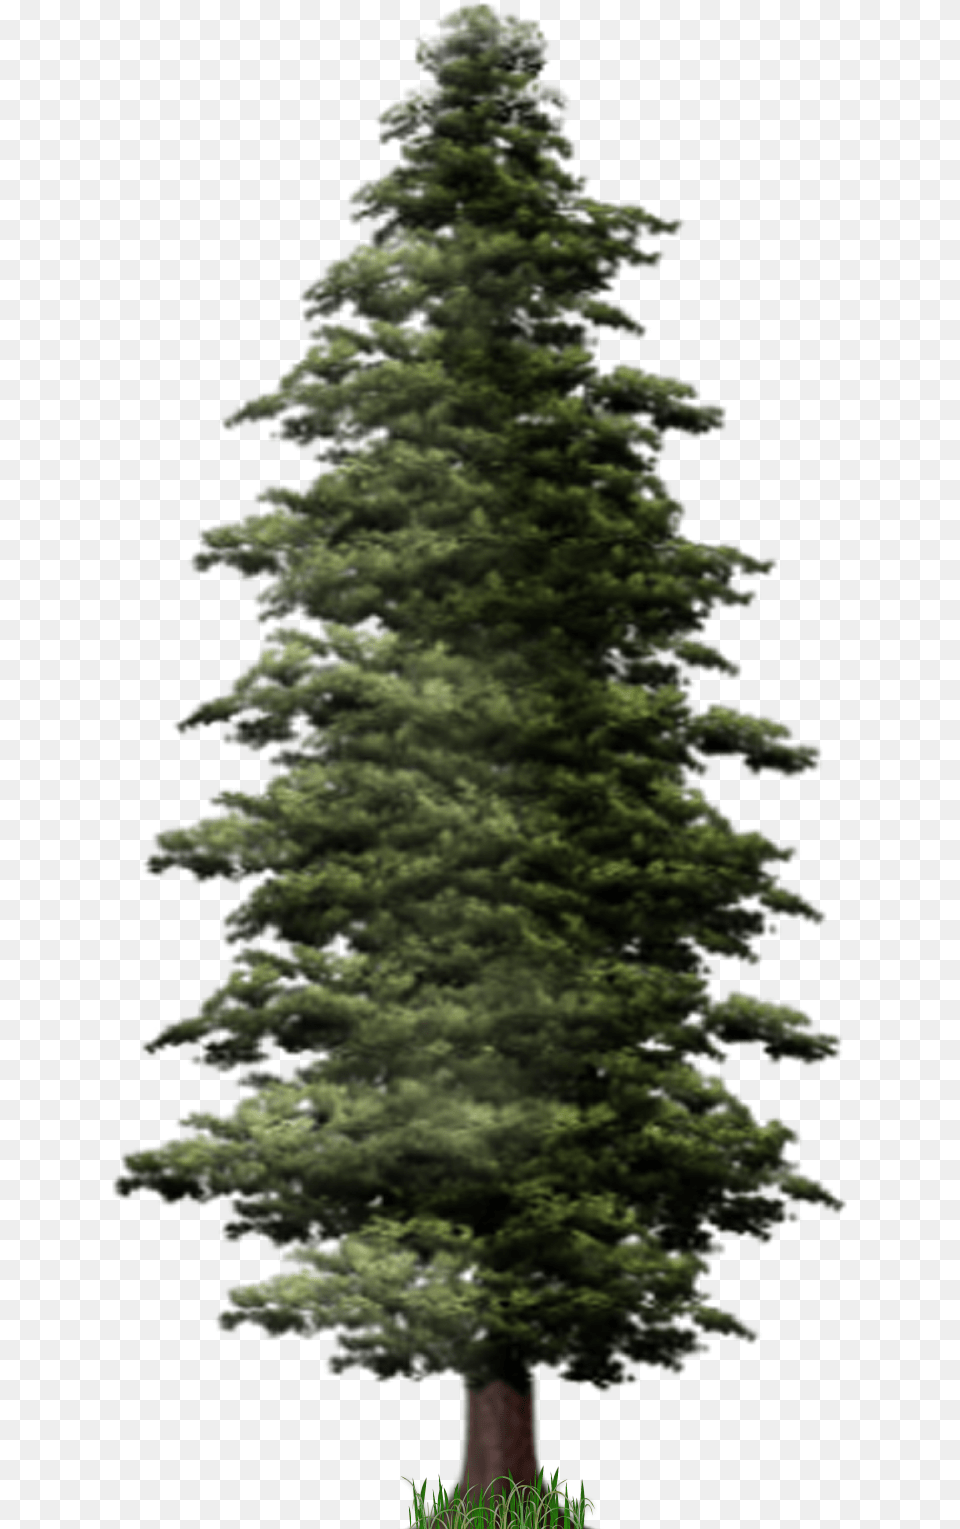 Pine Tree File For Designing Projects Pine Tree Fir, Plant, Conifer Free Png